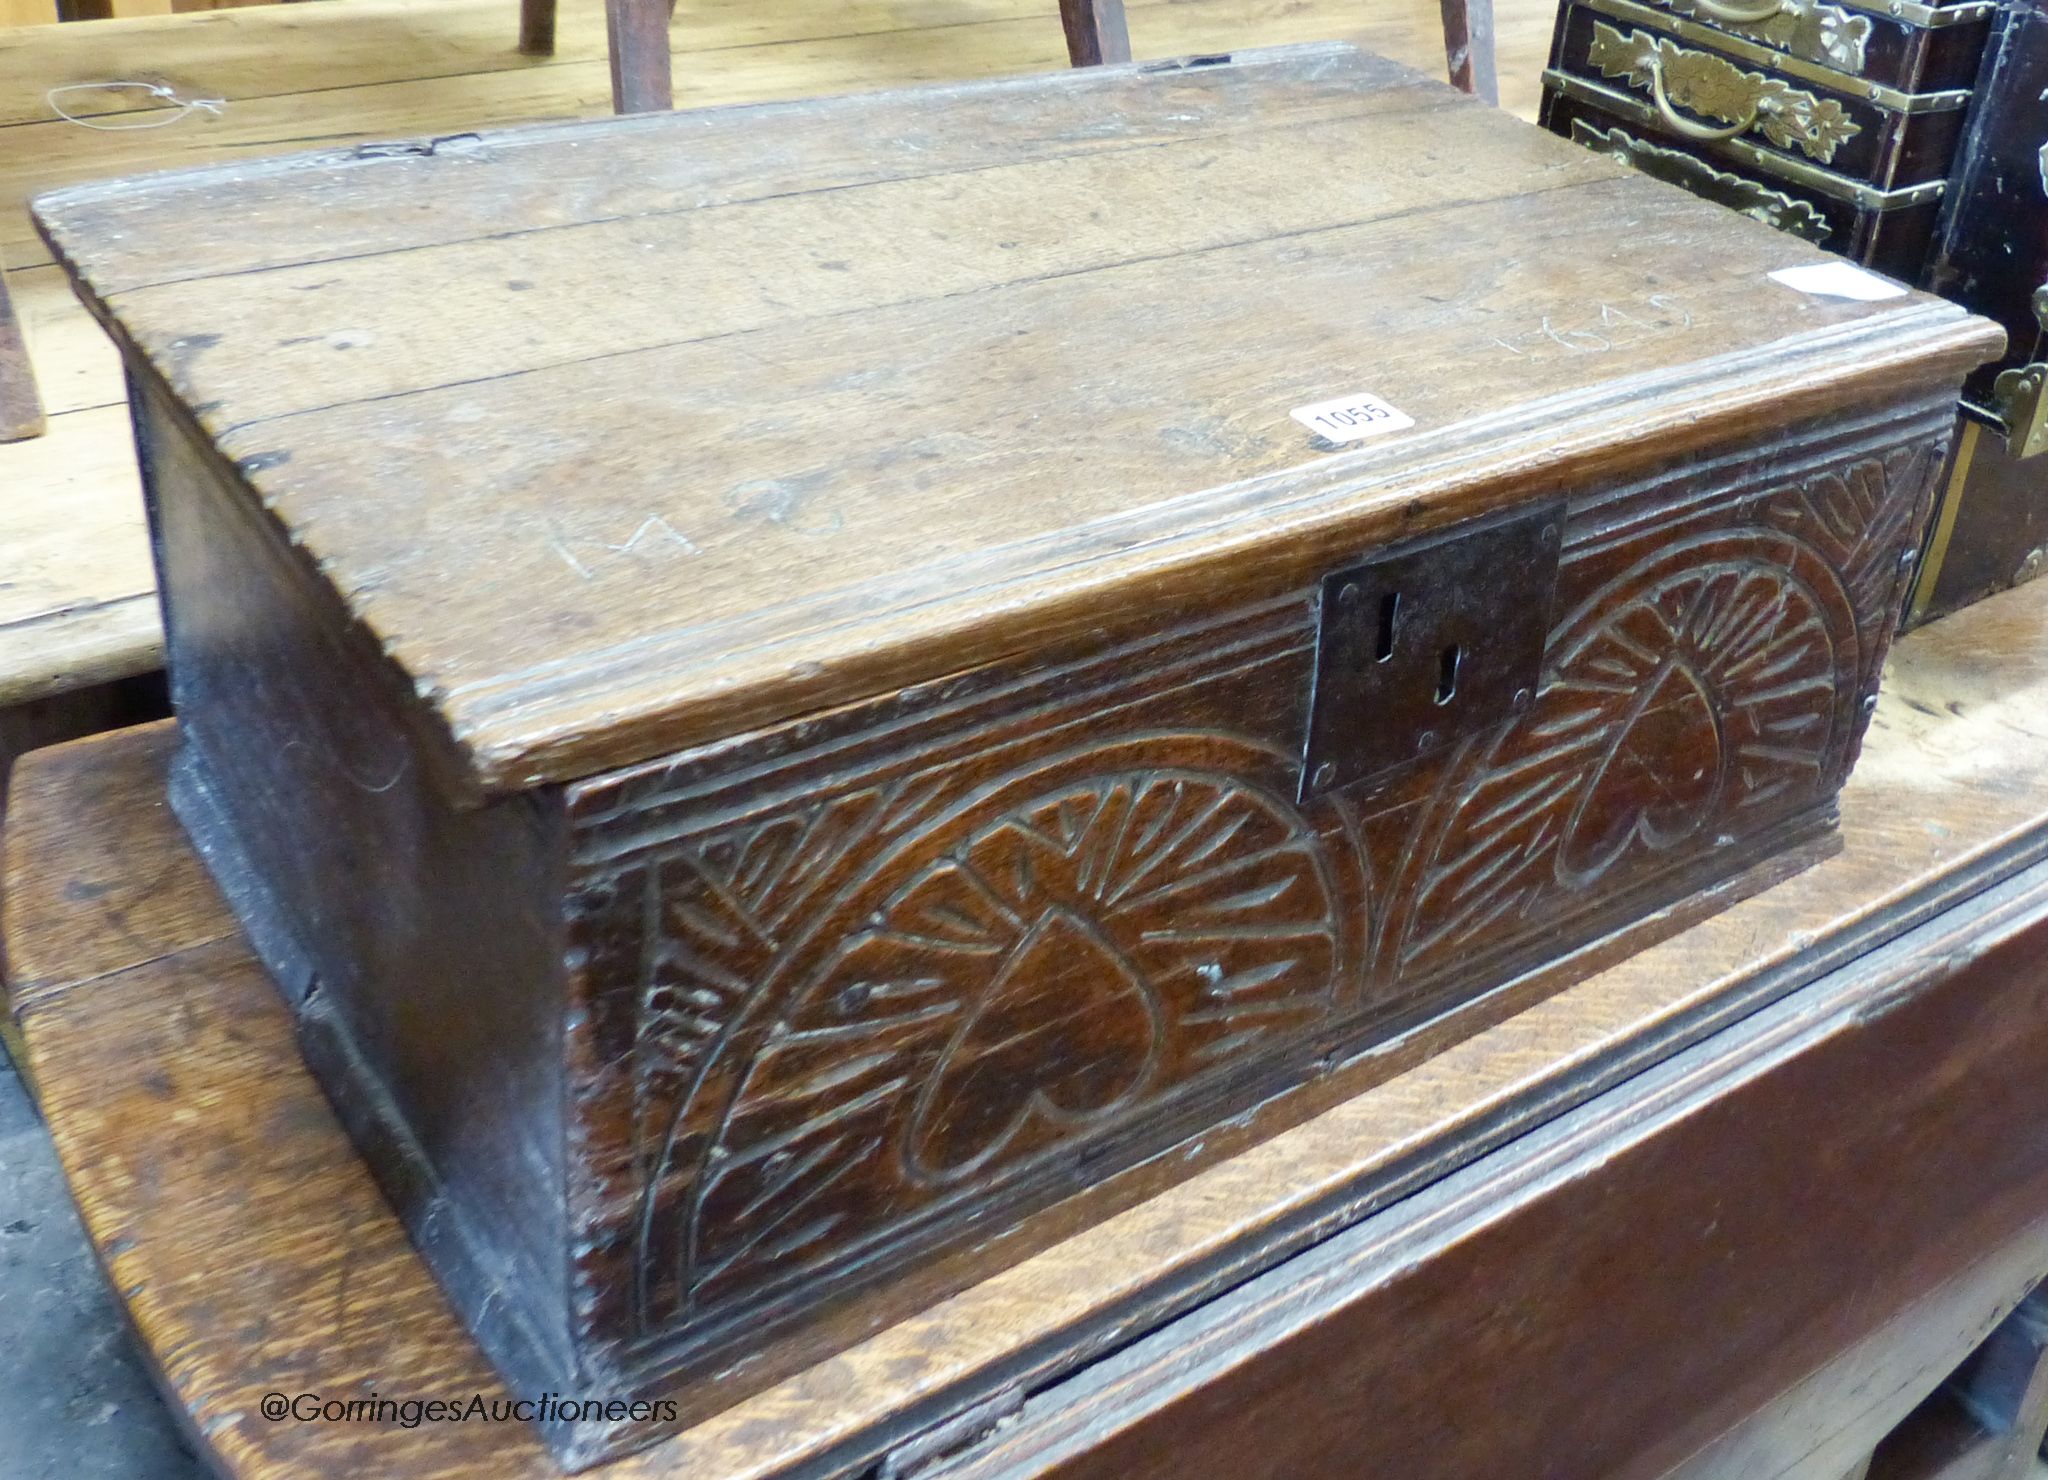 A 17th century carved oak bible box with bible, width 56cm, depth 36cm, height 22cm